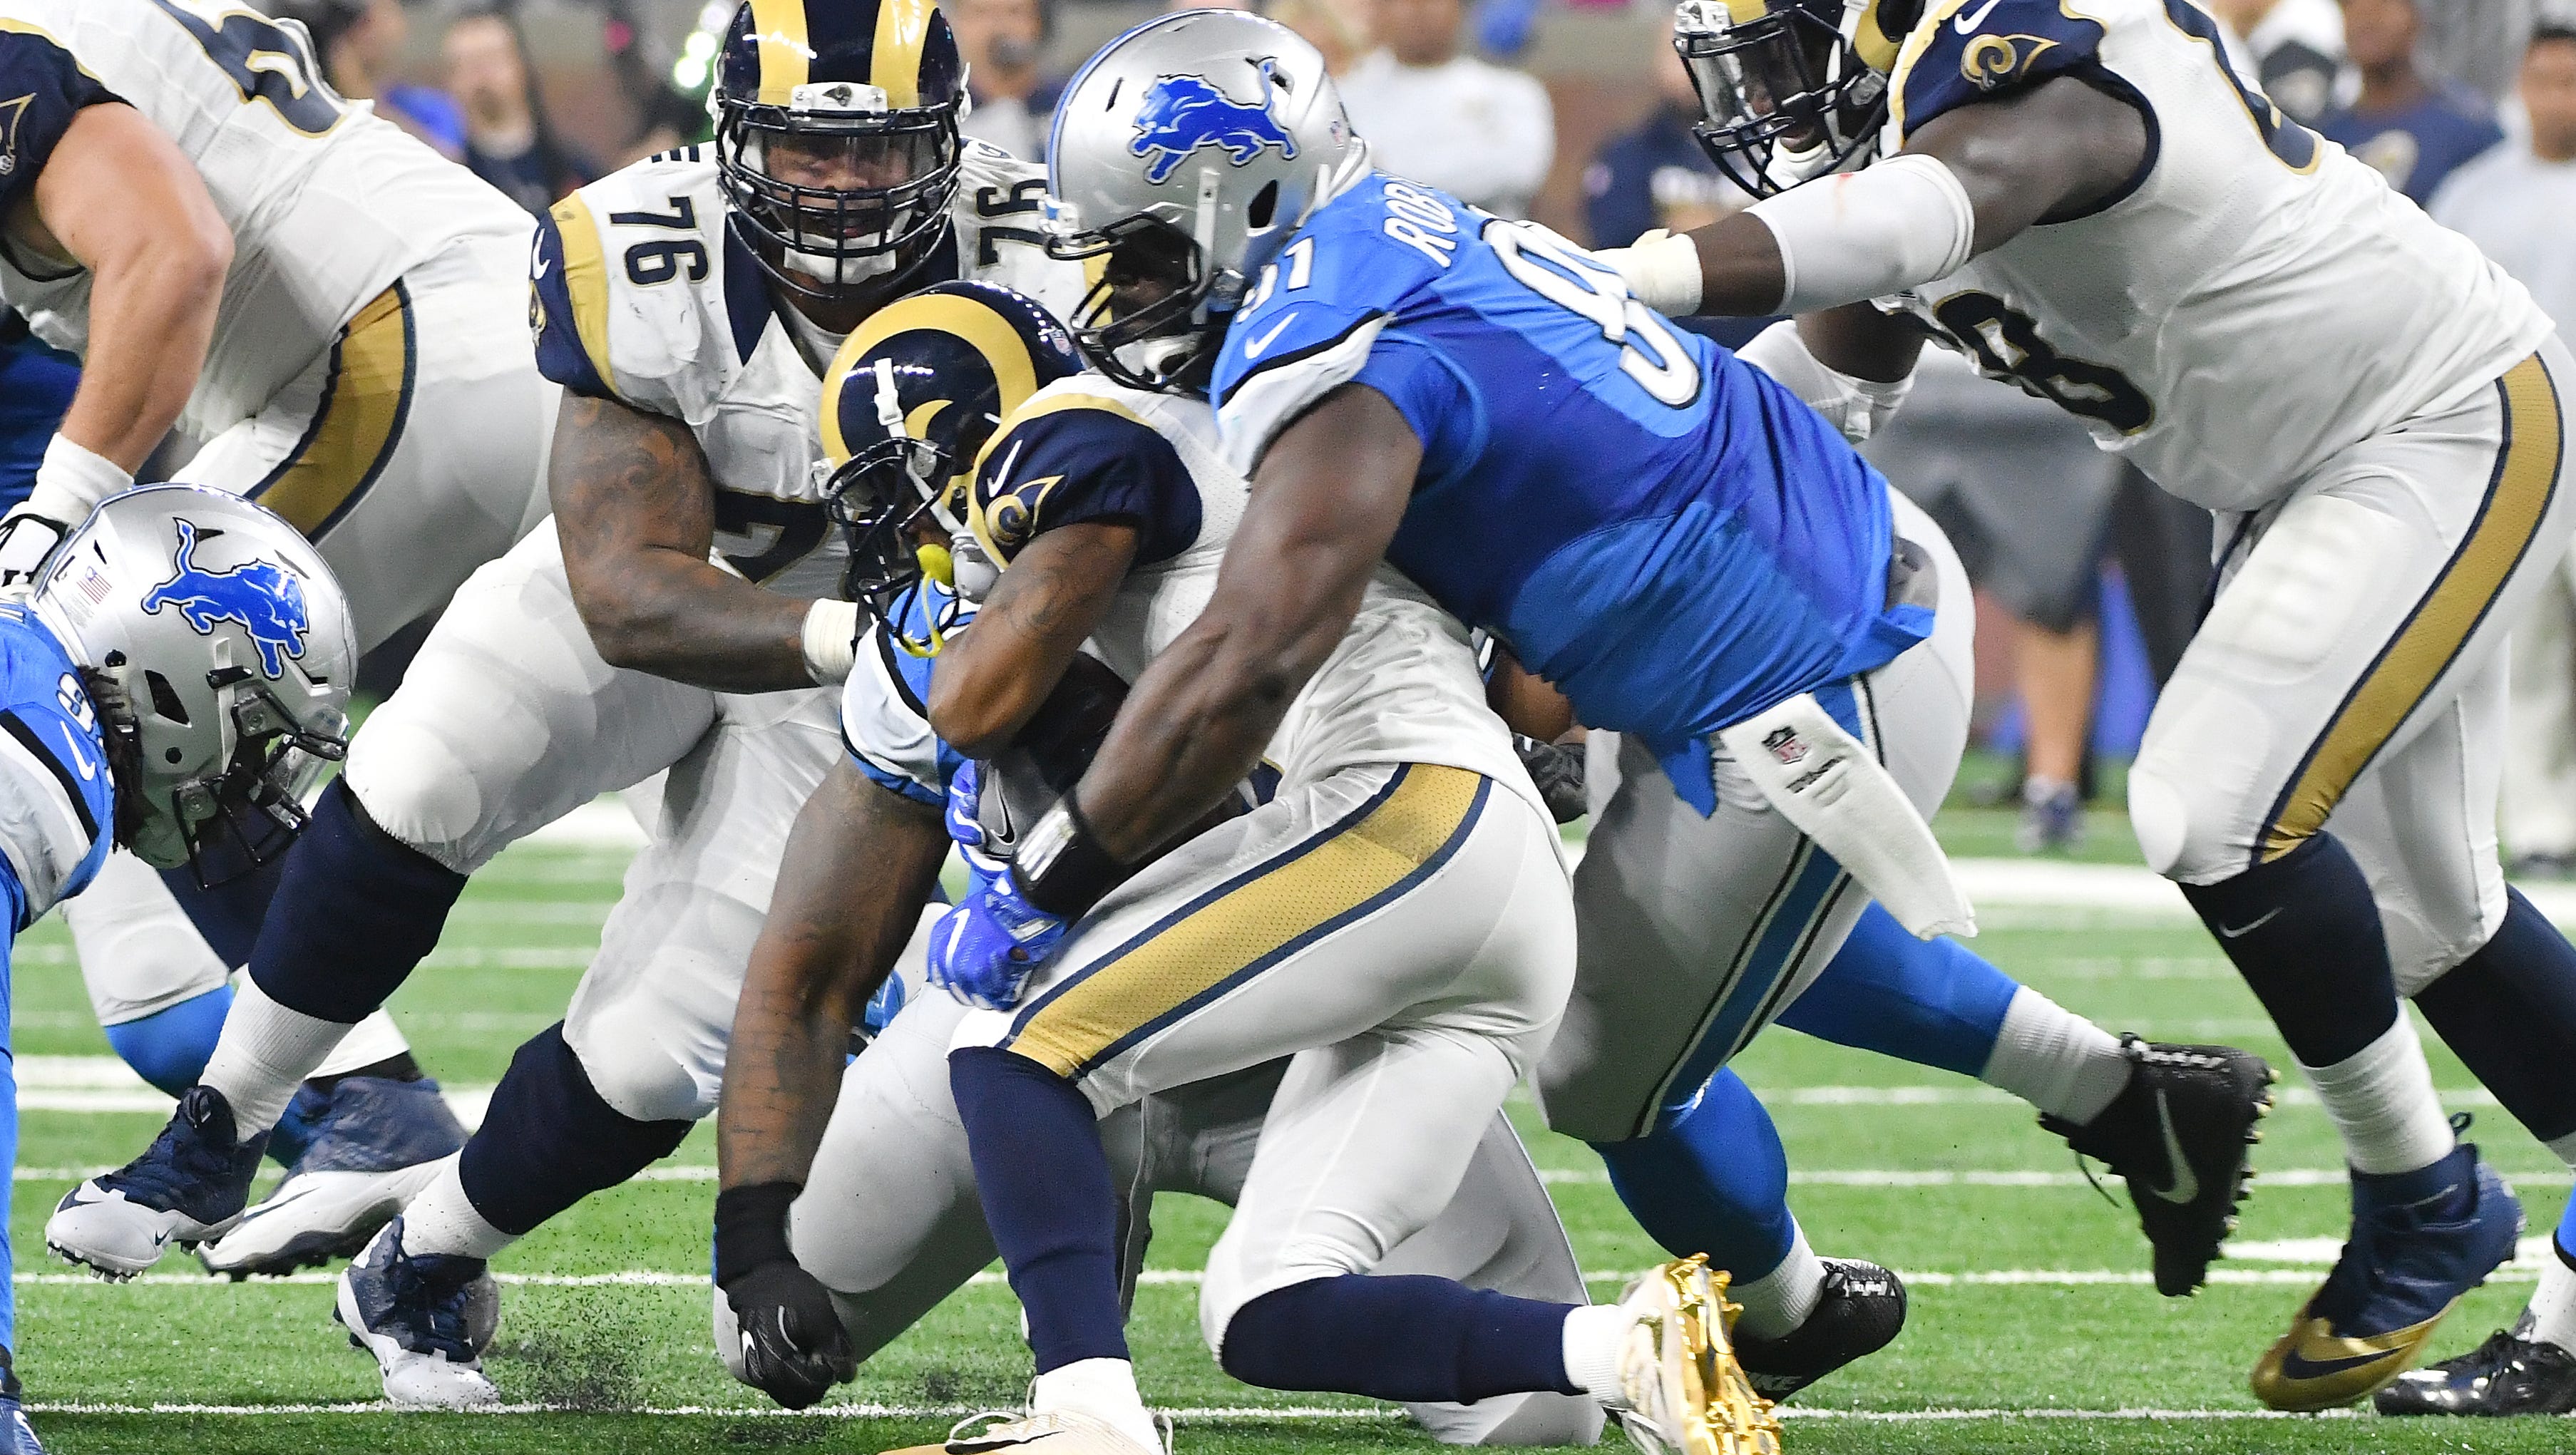 Lions A'Shawn Robinson brings down Rams Tavon Austin at the line of scrimmage in the second quarter.